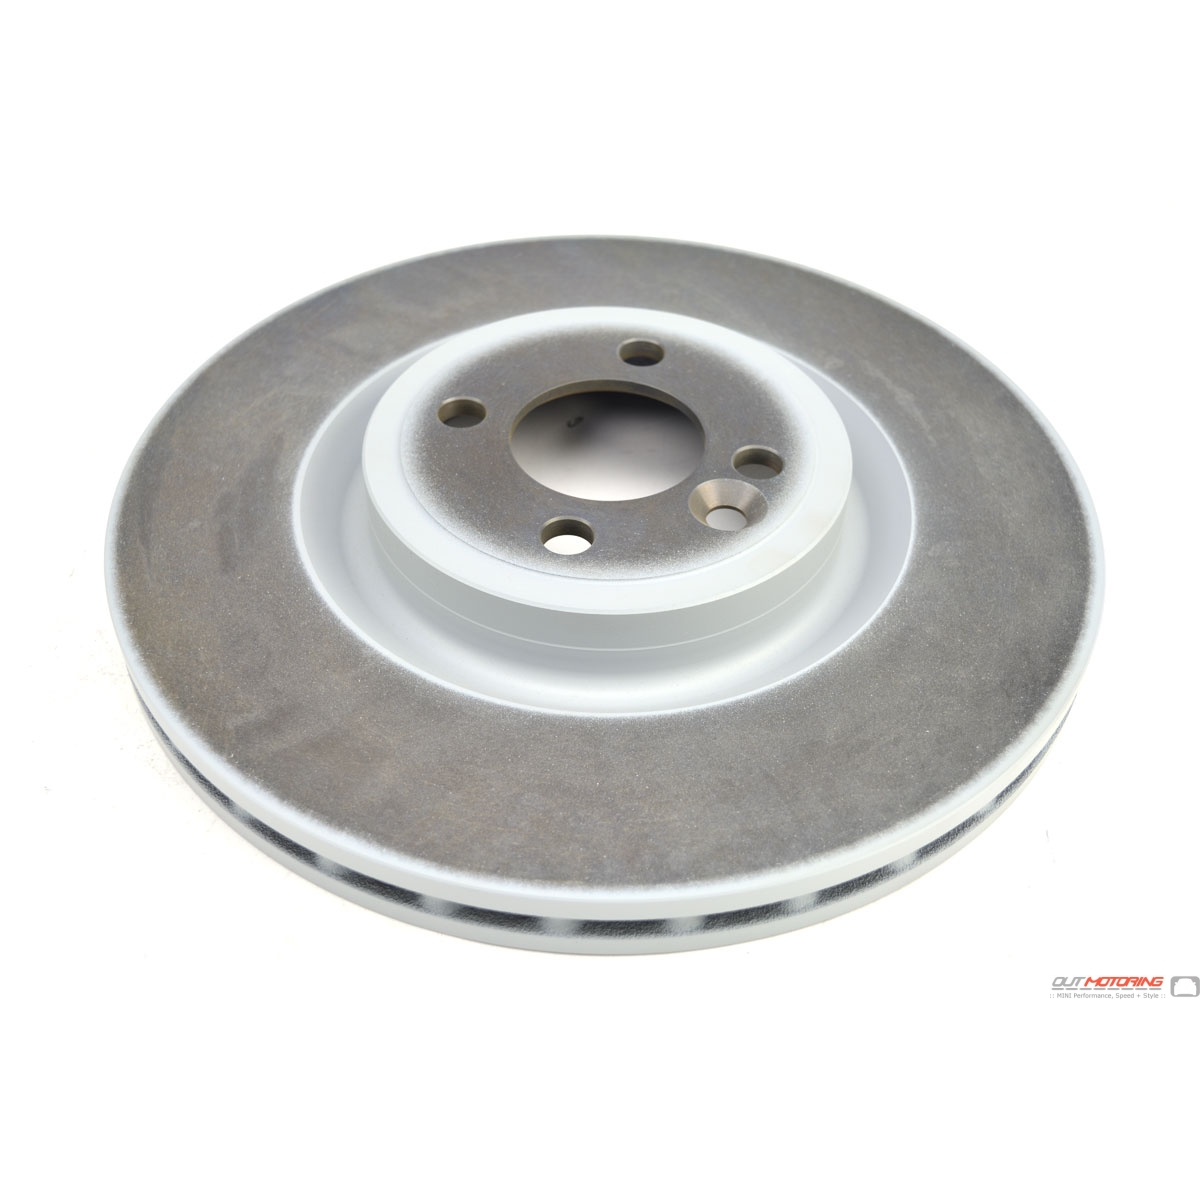 Details about   For 2006-2013 Mini Cooper Brake Rotor Front Bosch 22841WD 2007 2008 2009 2010